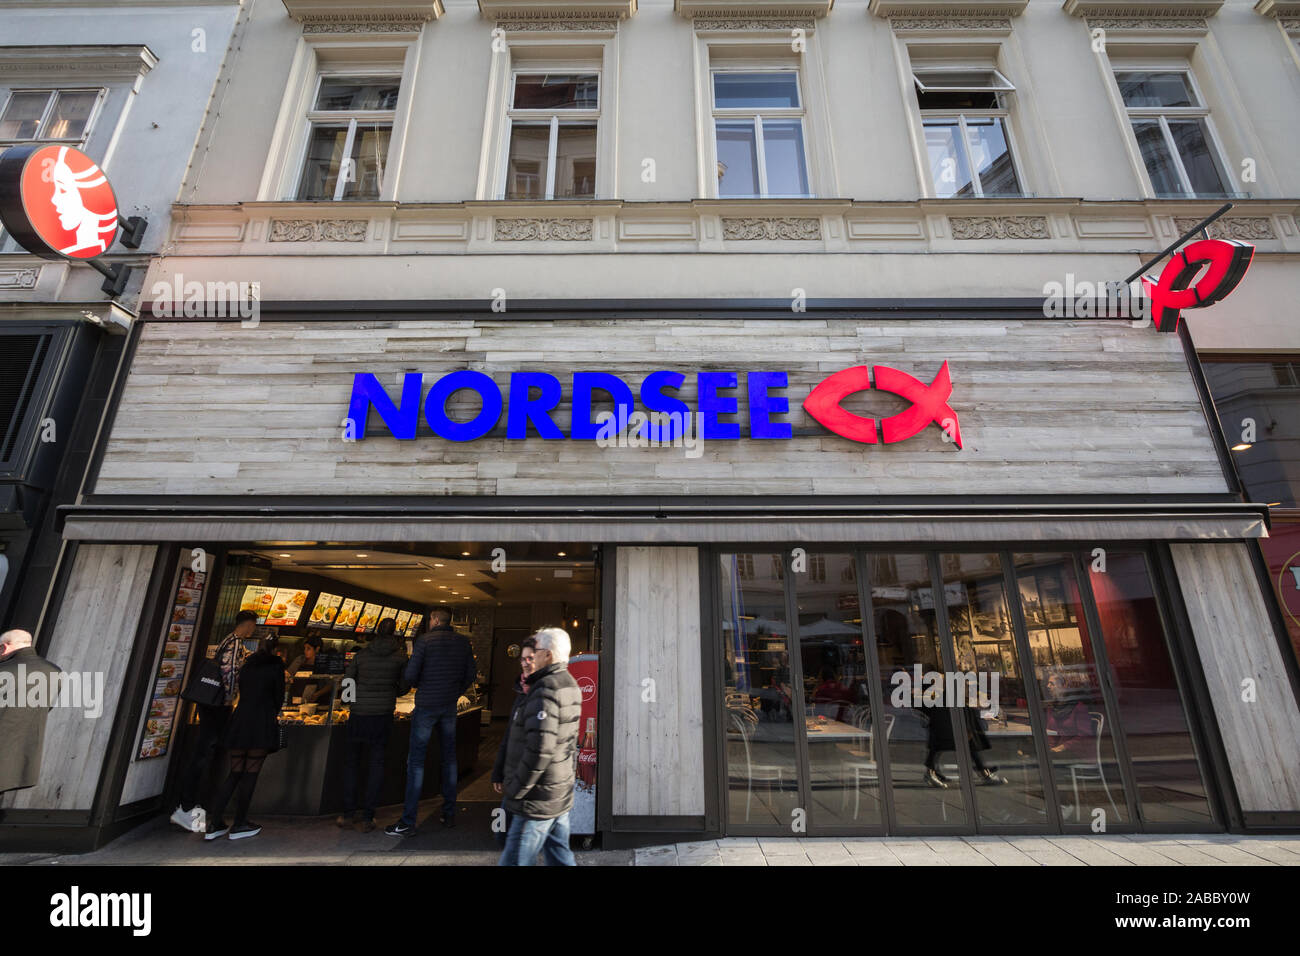 VIENNA, AUSTRIA - NOVEMBER 6, 2019: Nordsee logo on one of their restaurants in Vienna. Nordsee is a German chain of fast food restaurants specialized Stock Photo